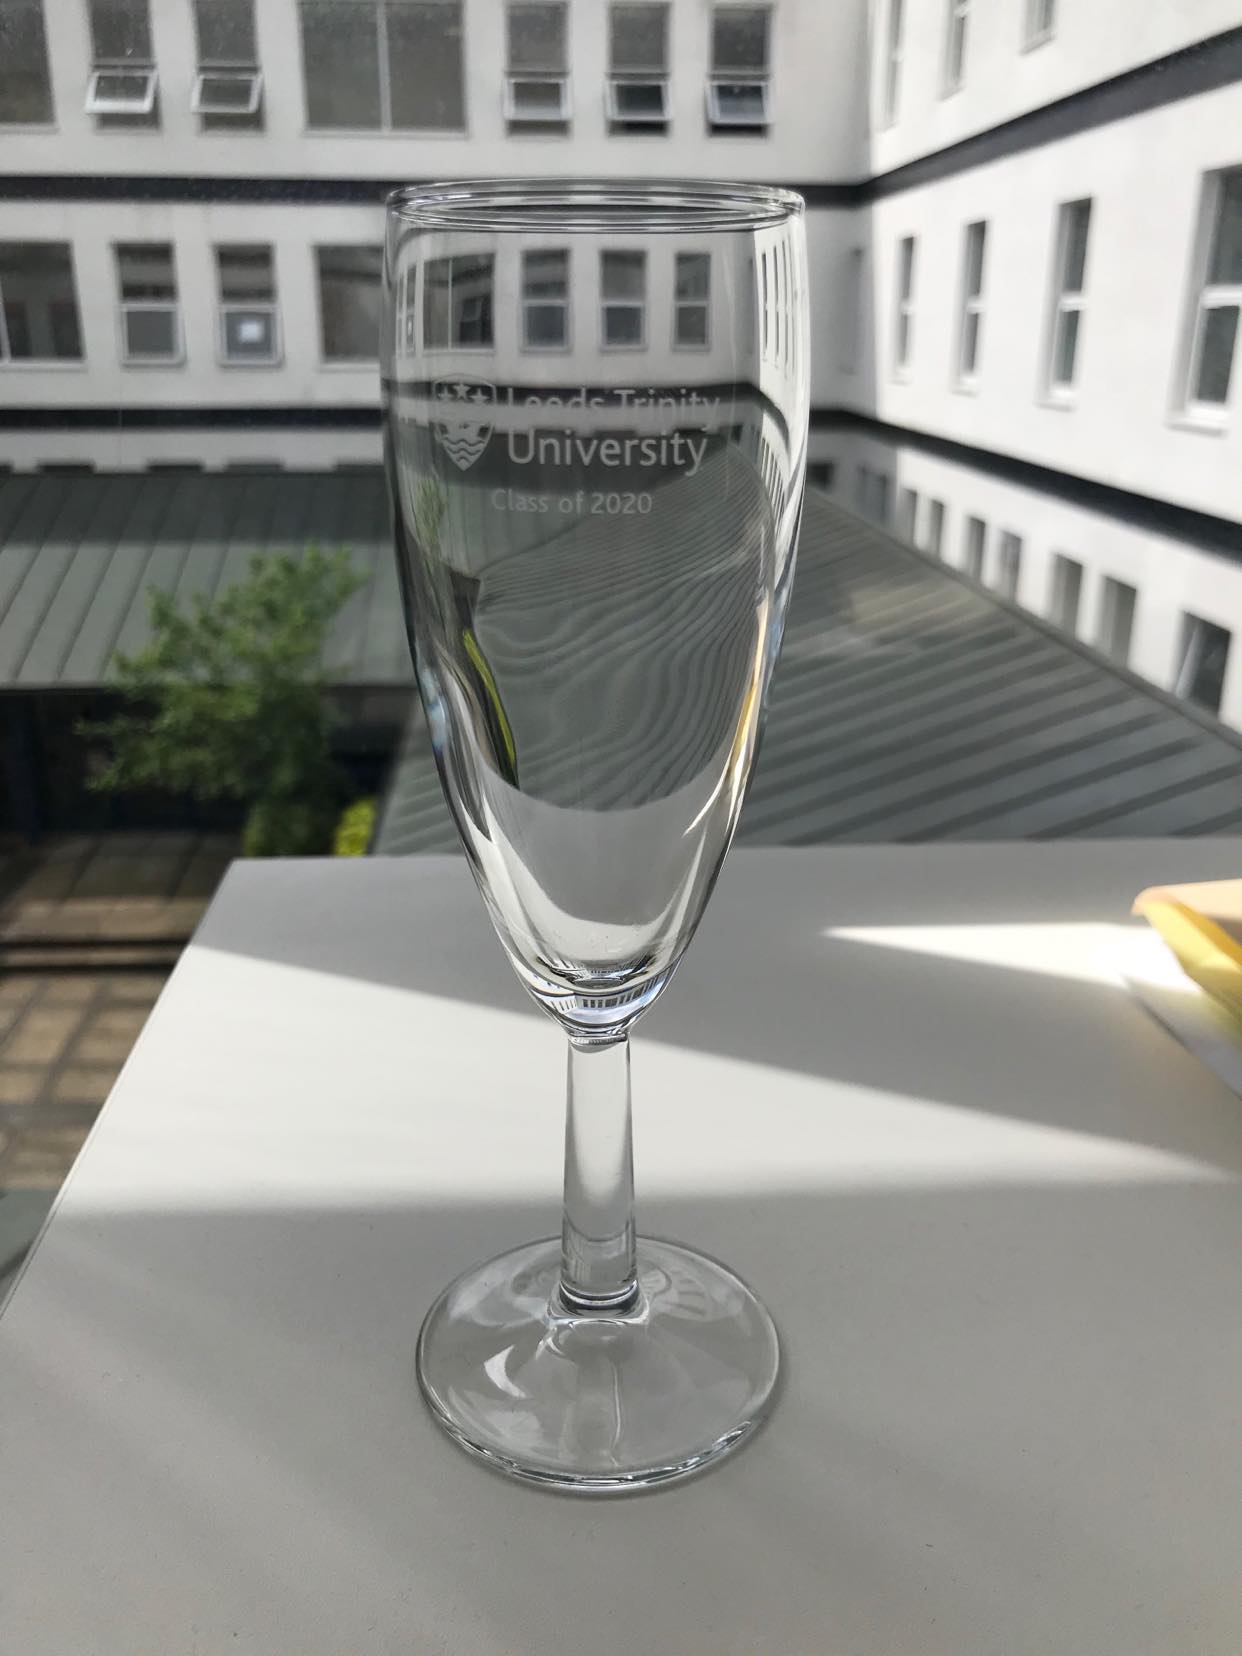 Class of 2020 Engraved Champagne Flute